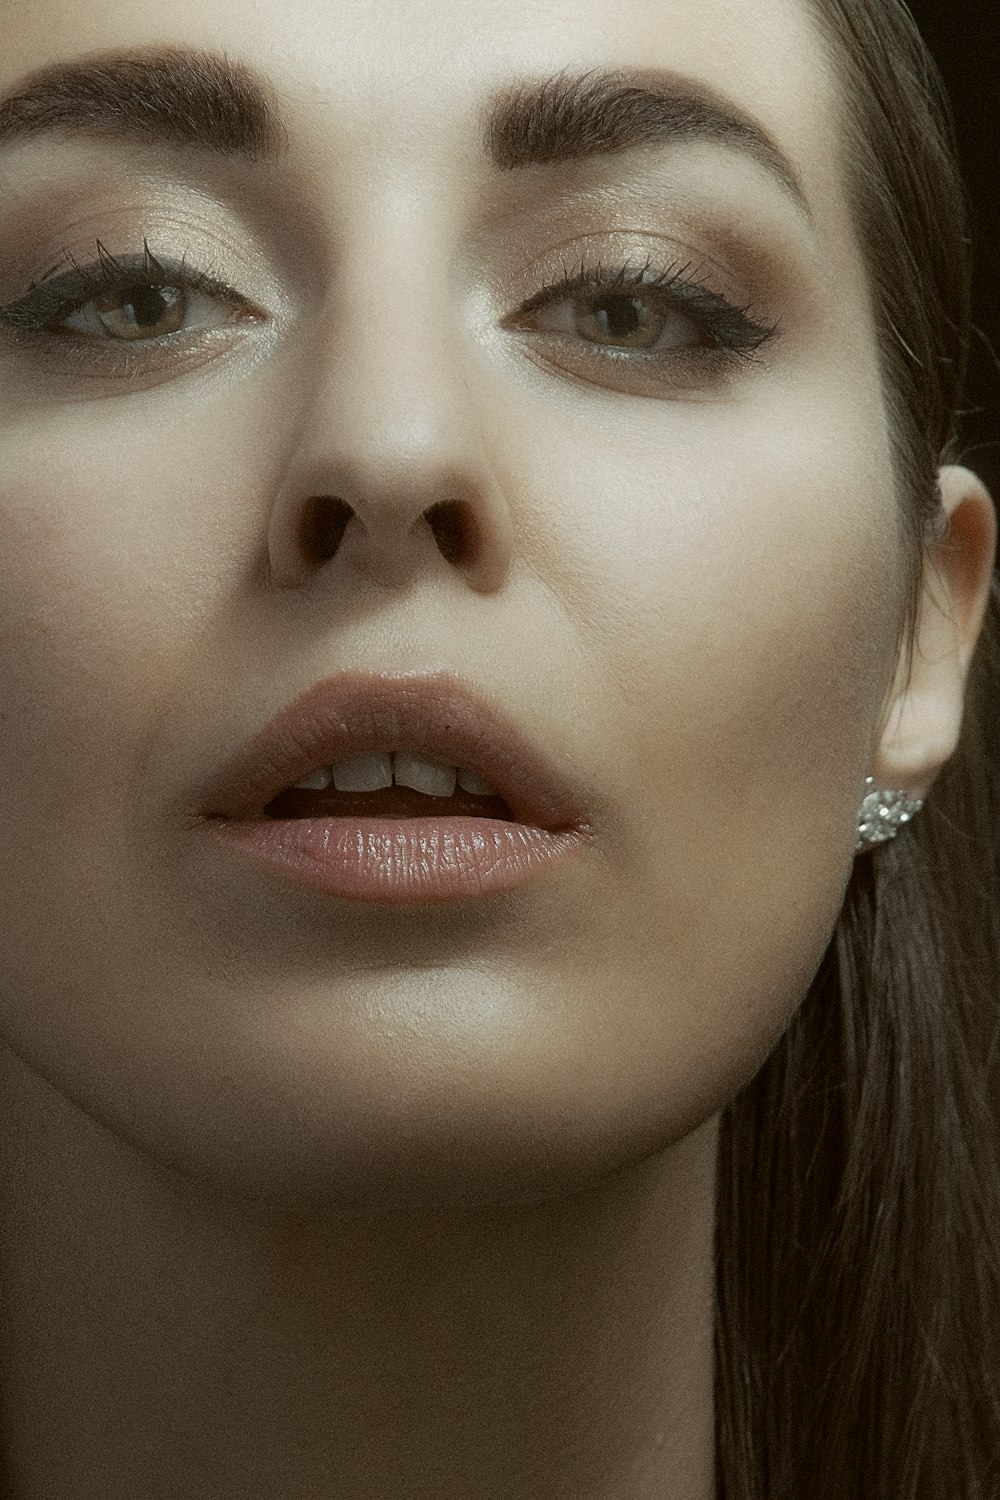 woman with silver and diamond stud earrings